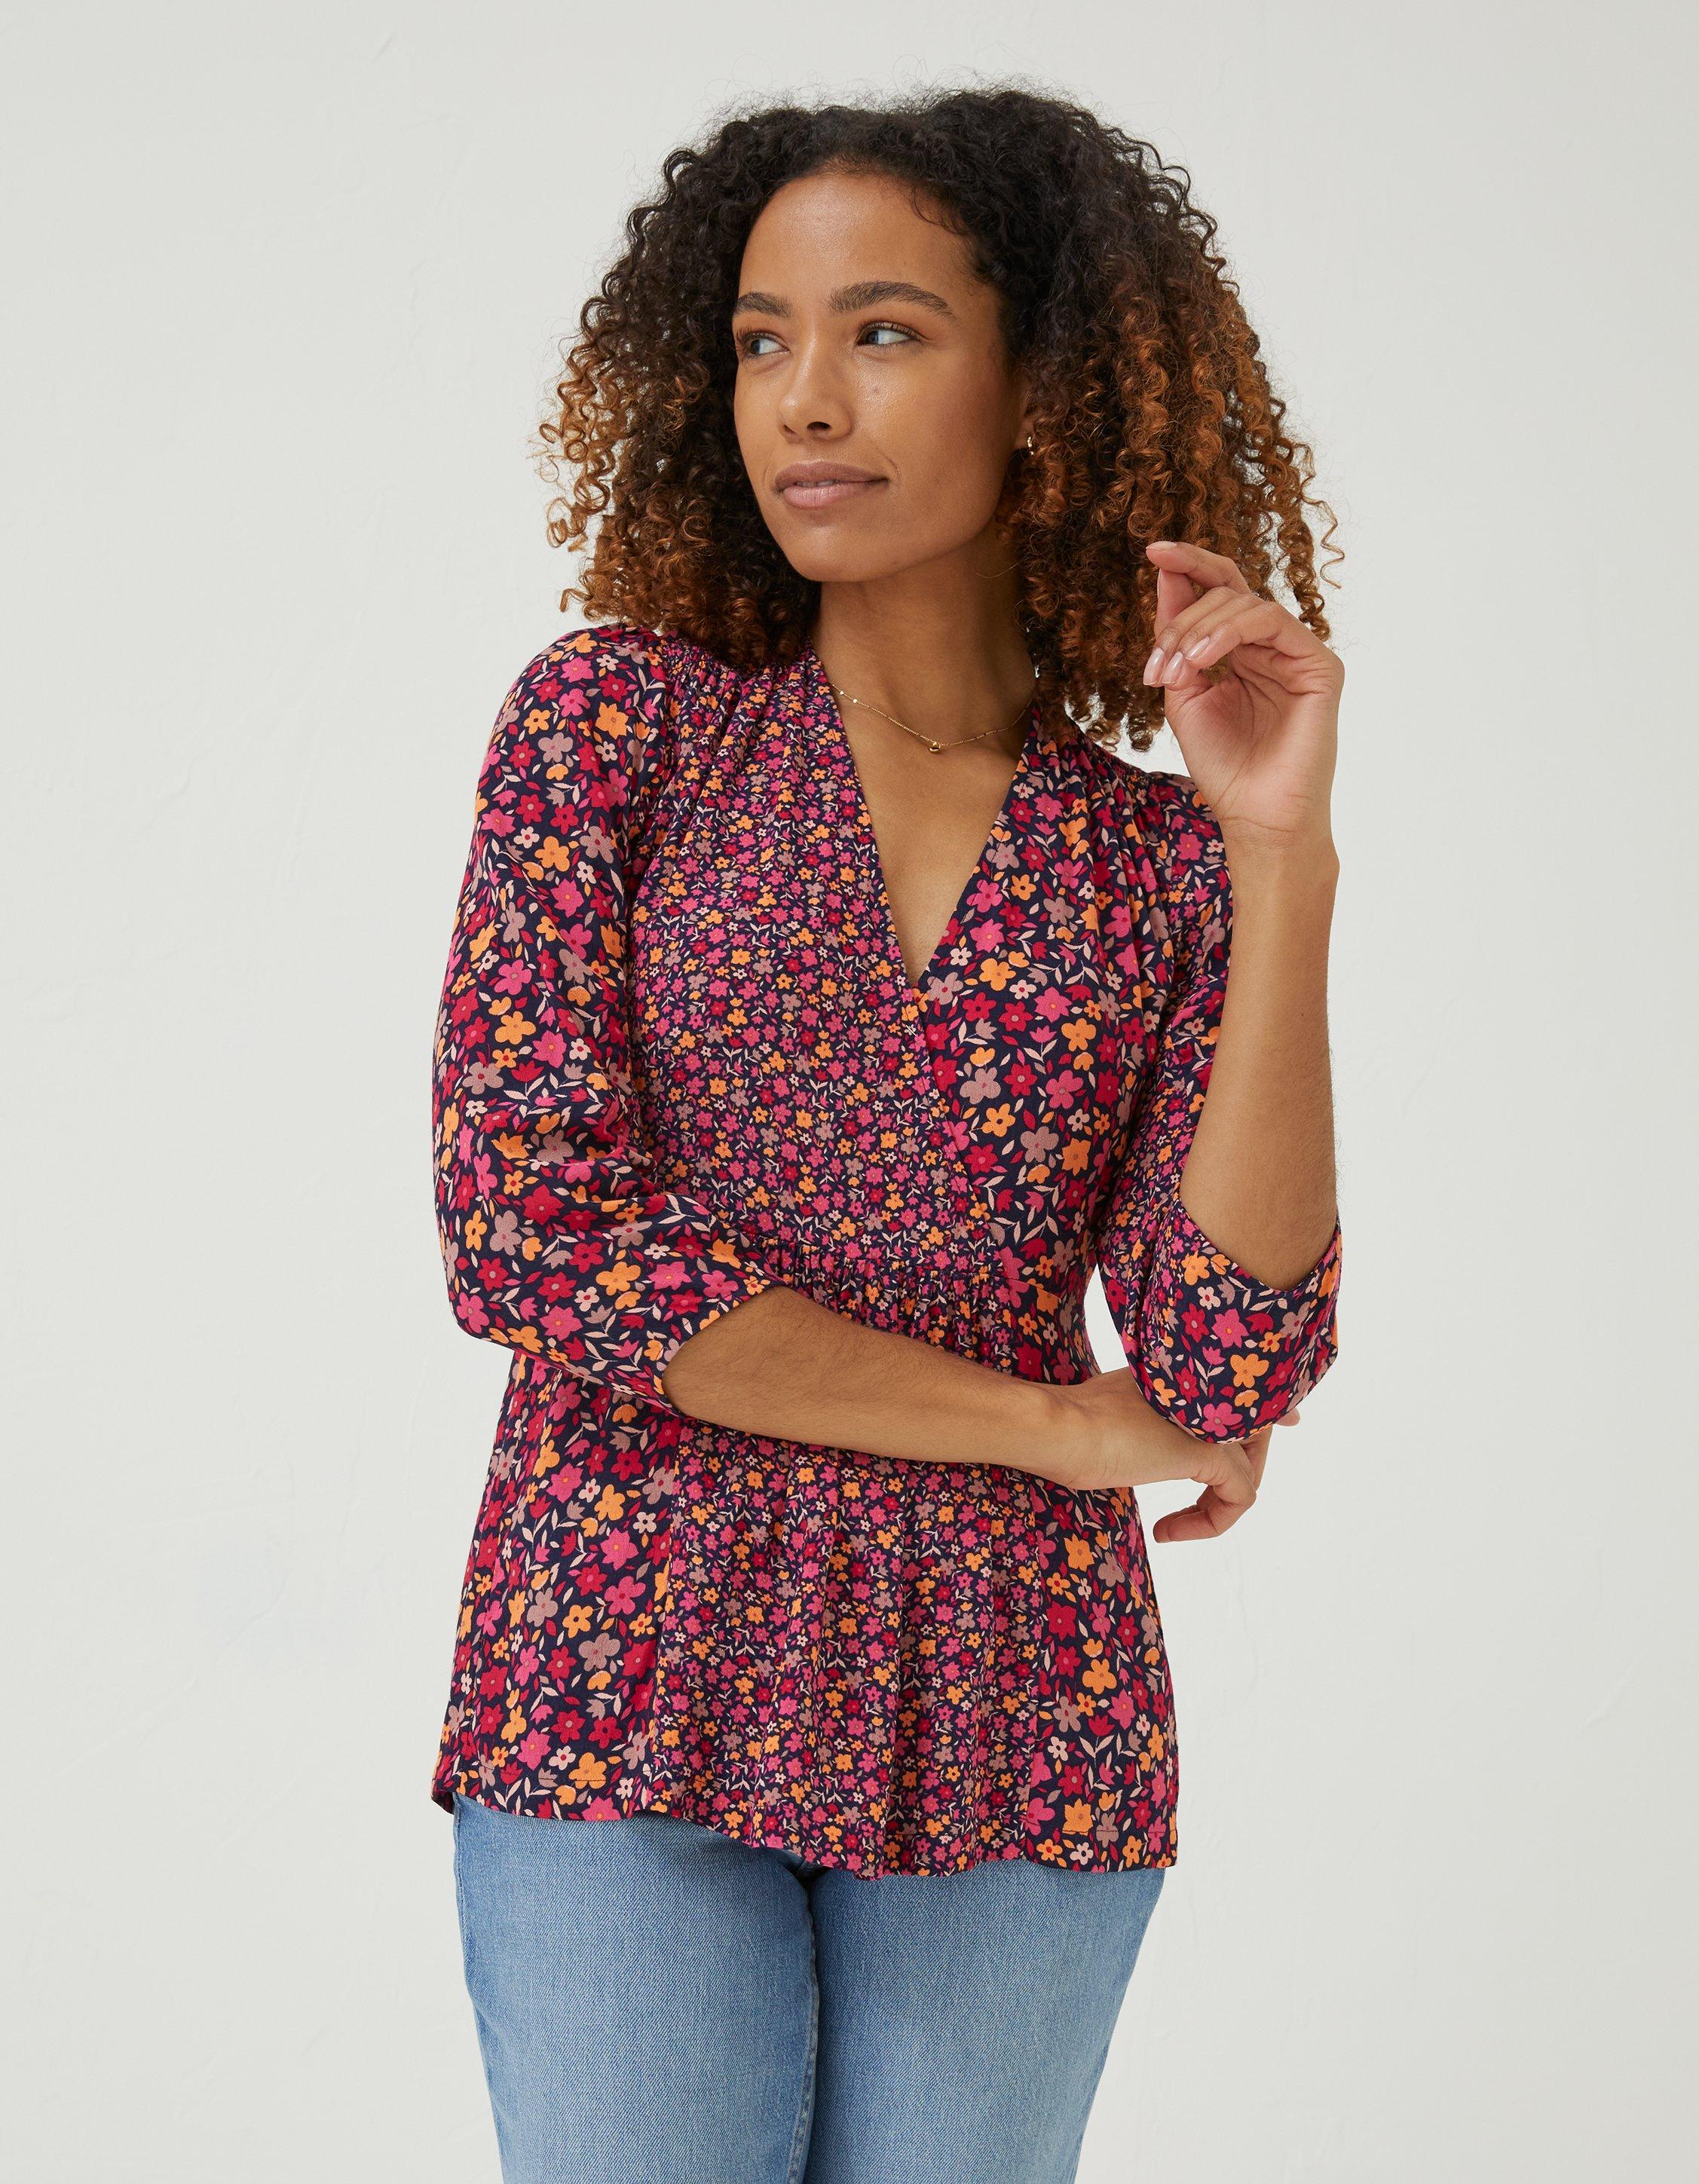 Floral Women's Shirts & Tops